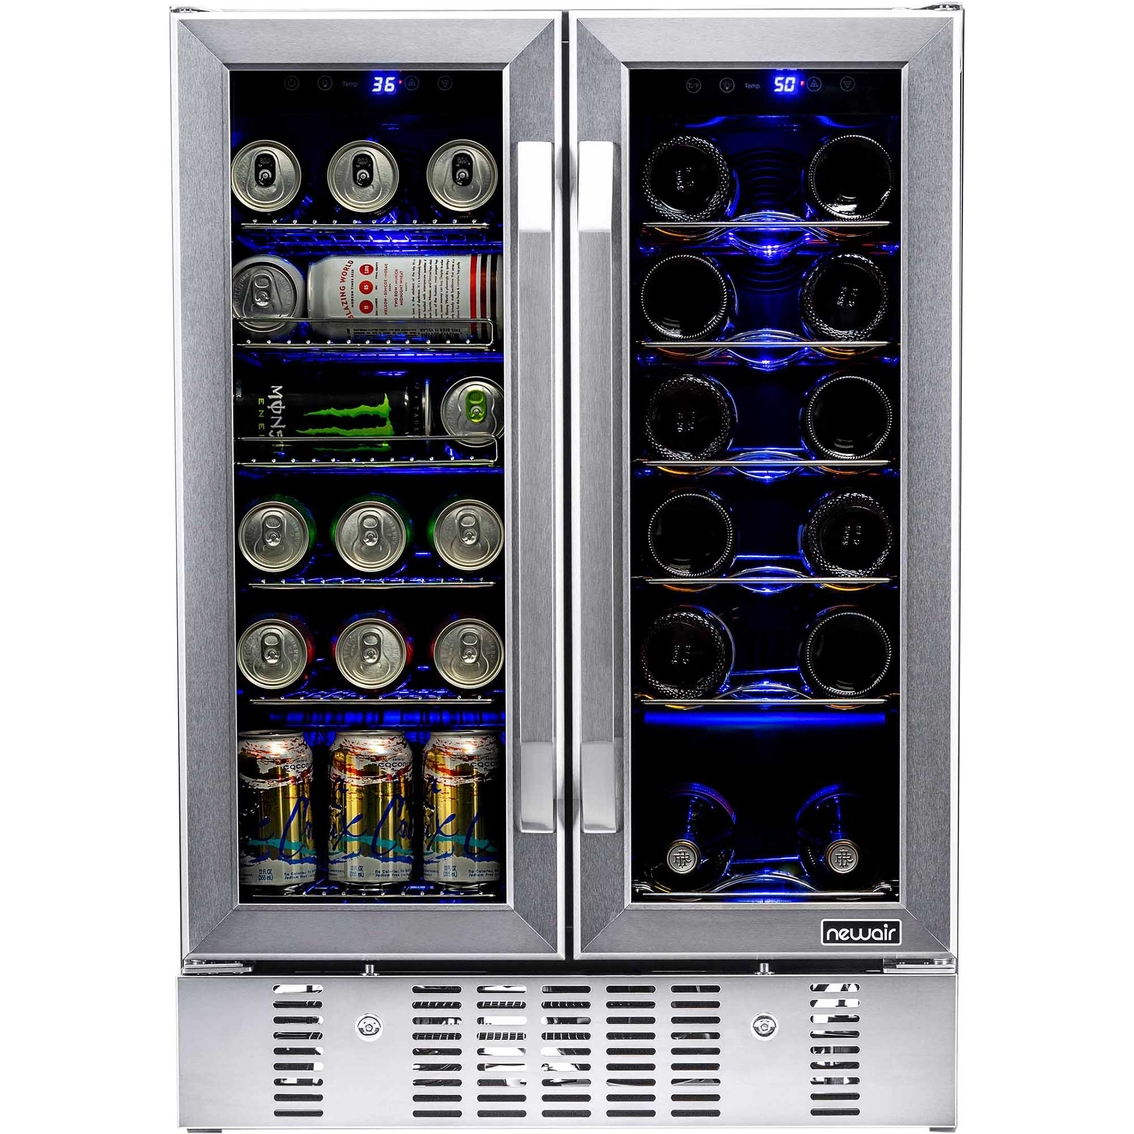 NewAir 24 in. Built-in Dual Zone 18 Bottle and 58 Can Wine and Beverage Cooler - Image 2 of 10